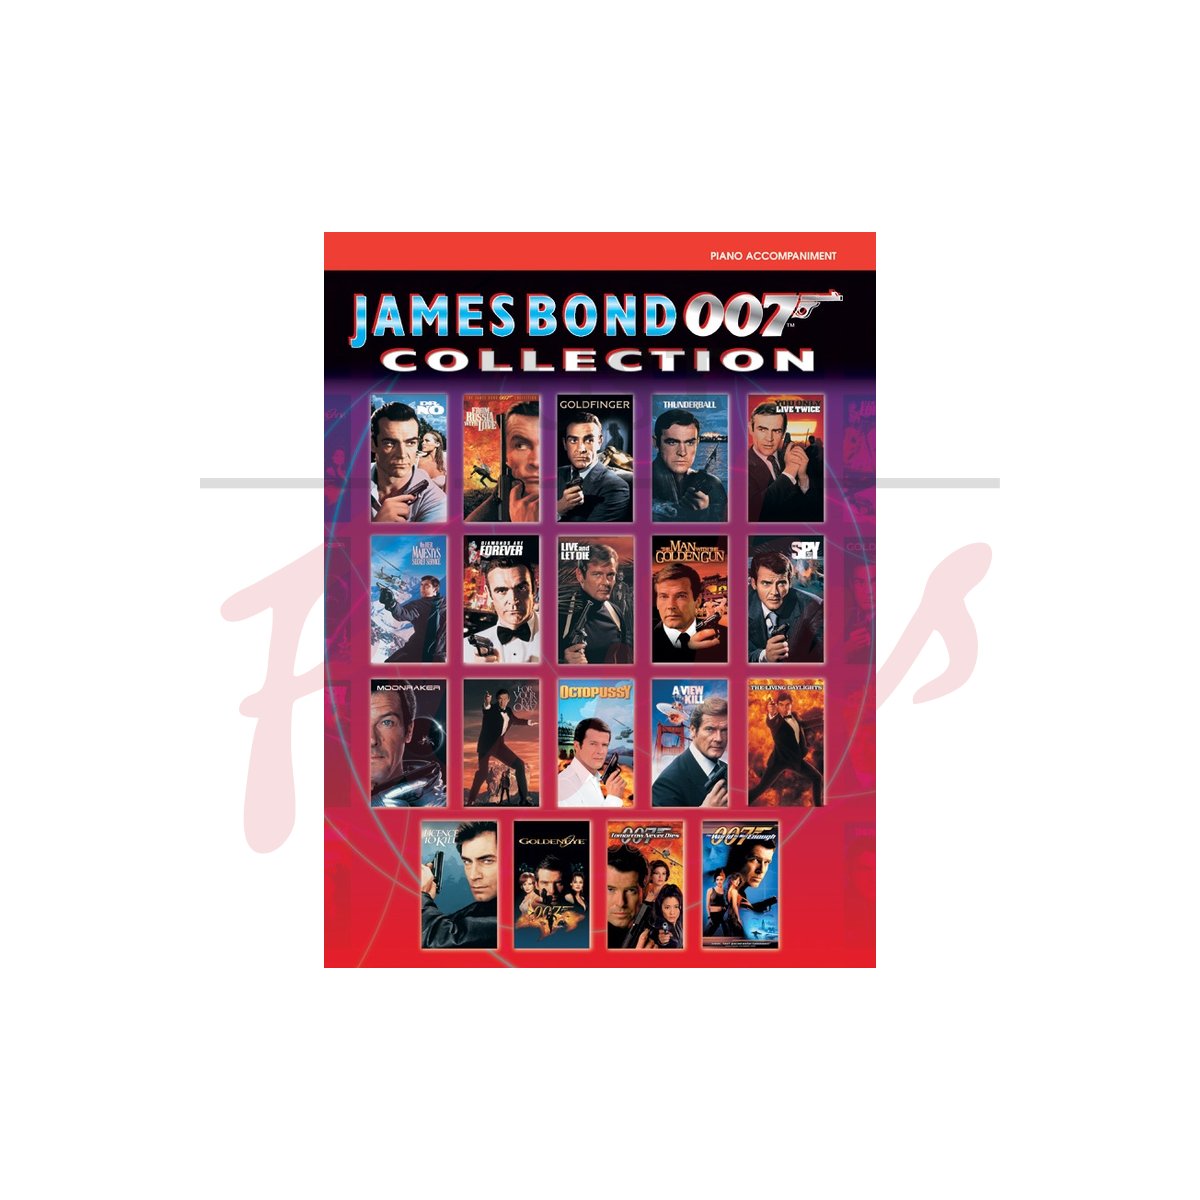 The James Bond 007 Collection [Piano Accompaniment Only]